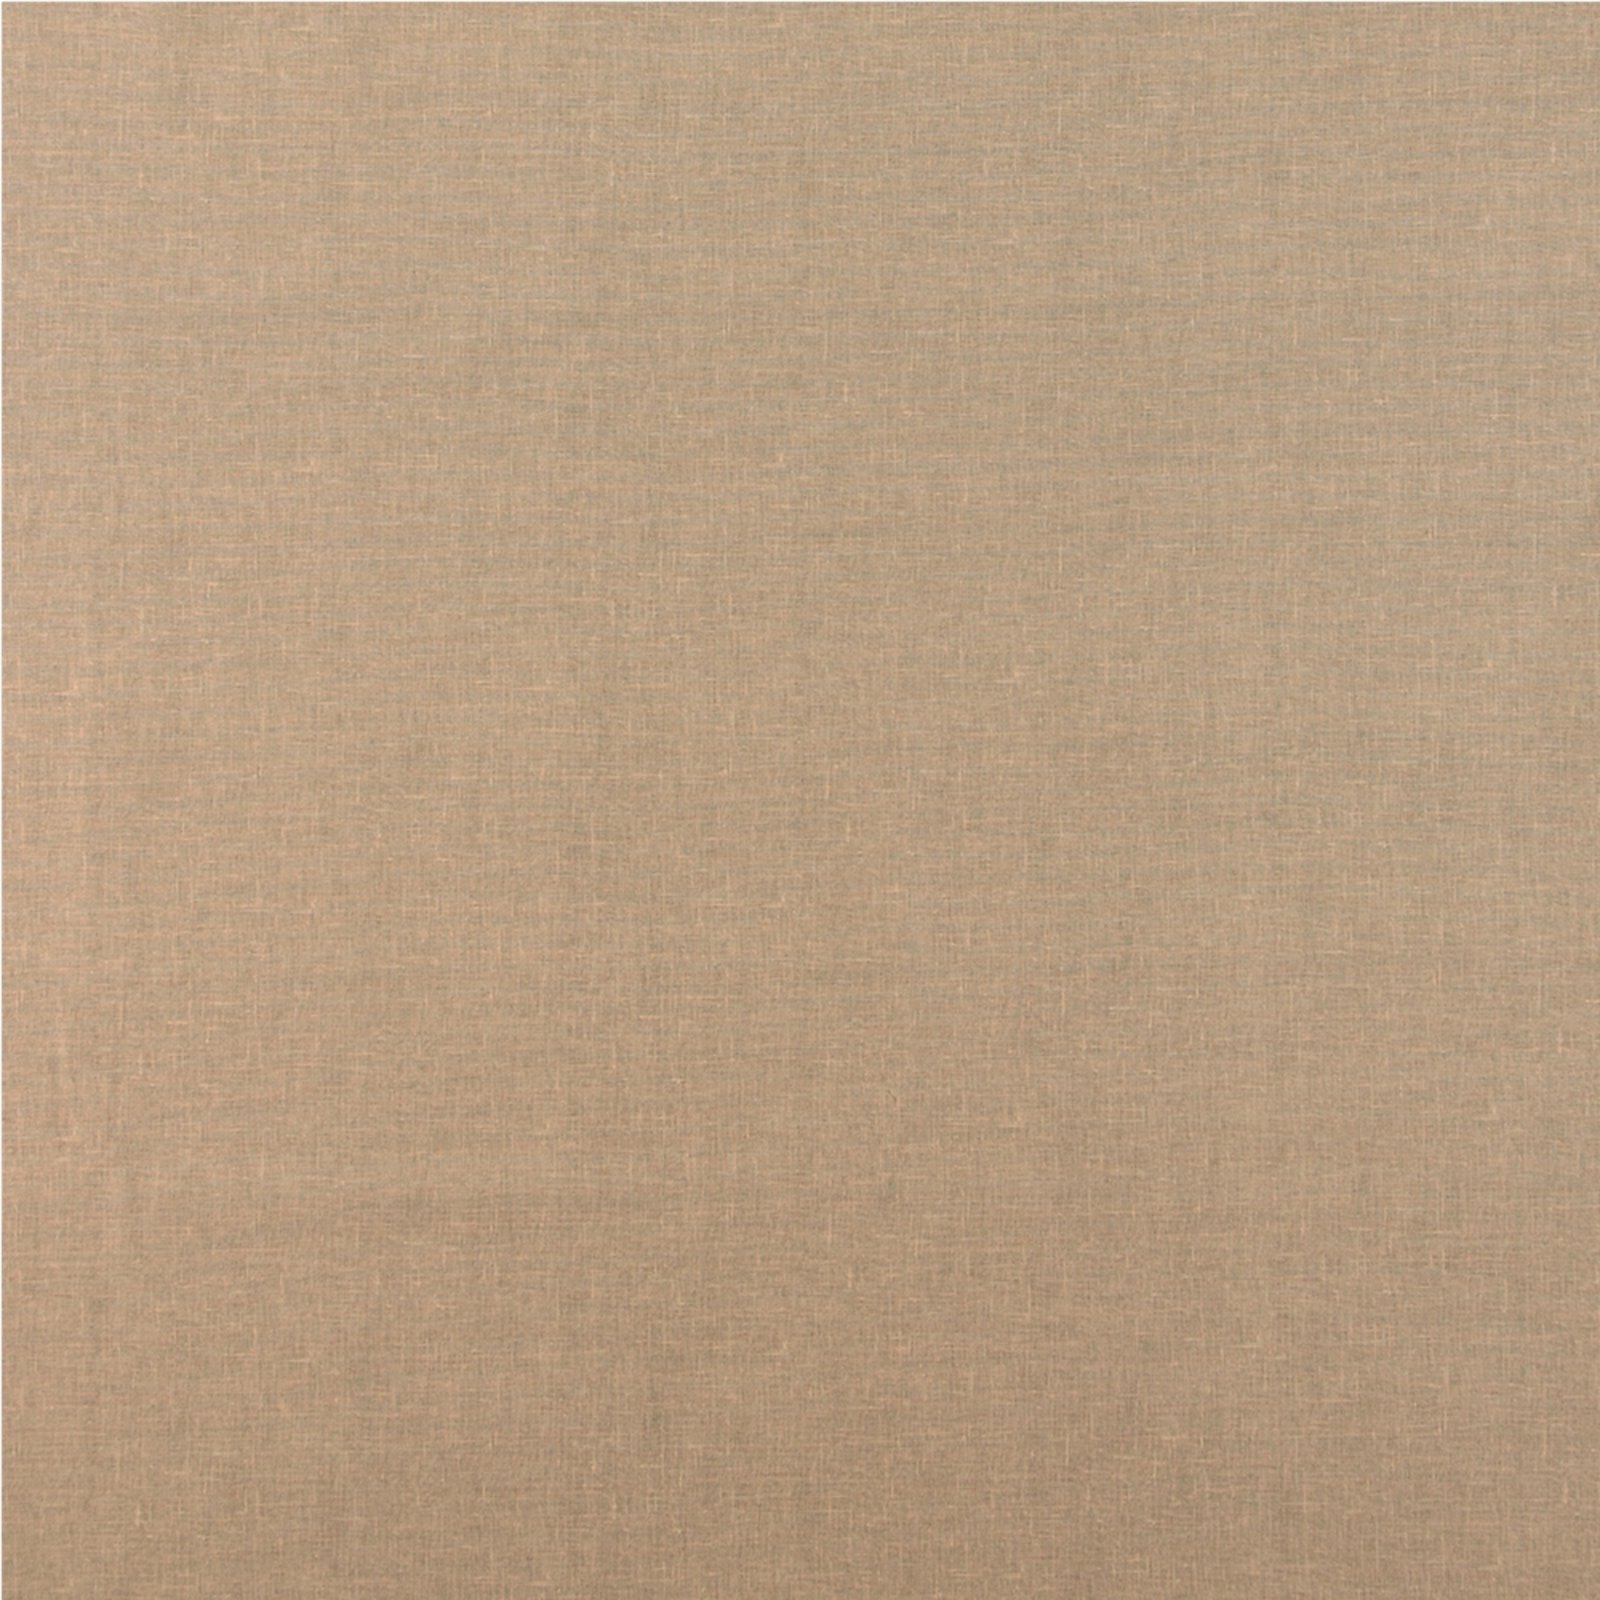 Woven oilcloth sand mottled 870279_pack_sp